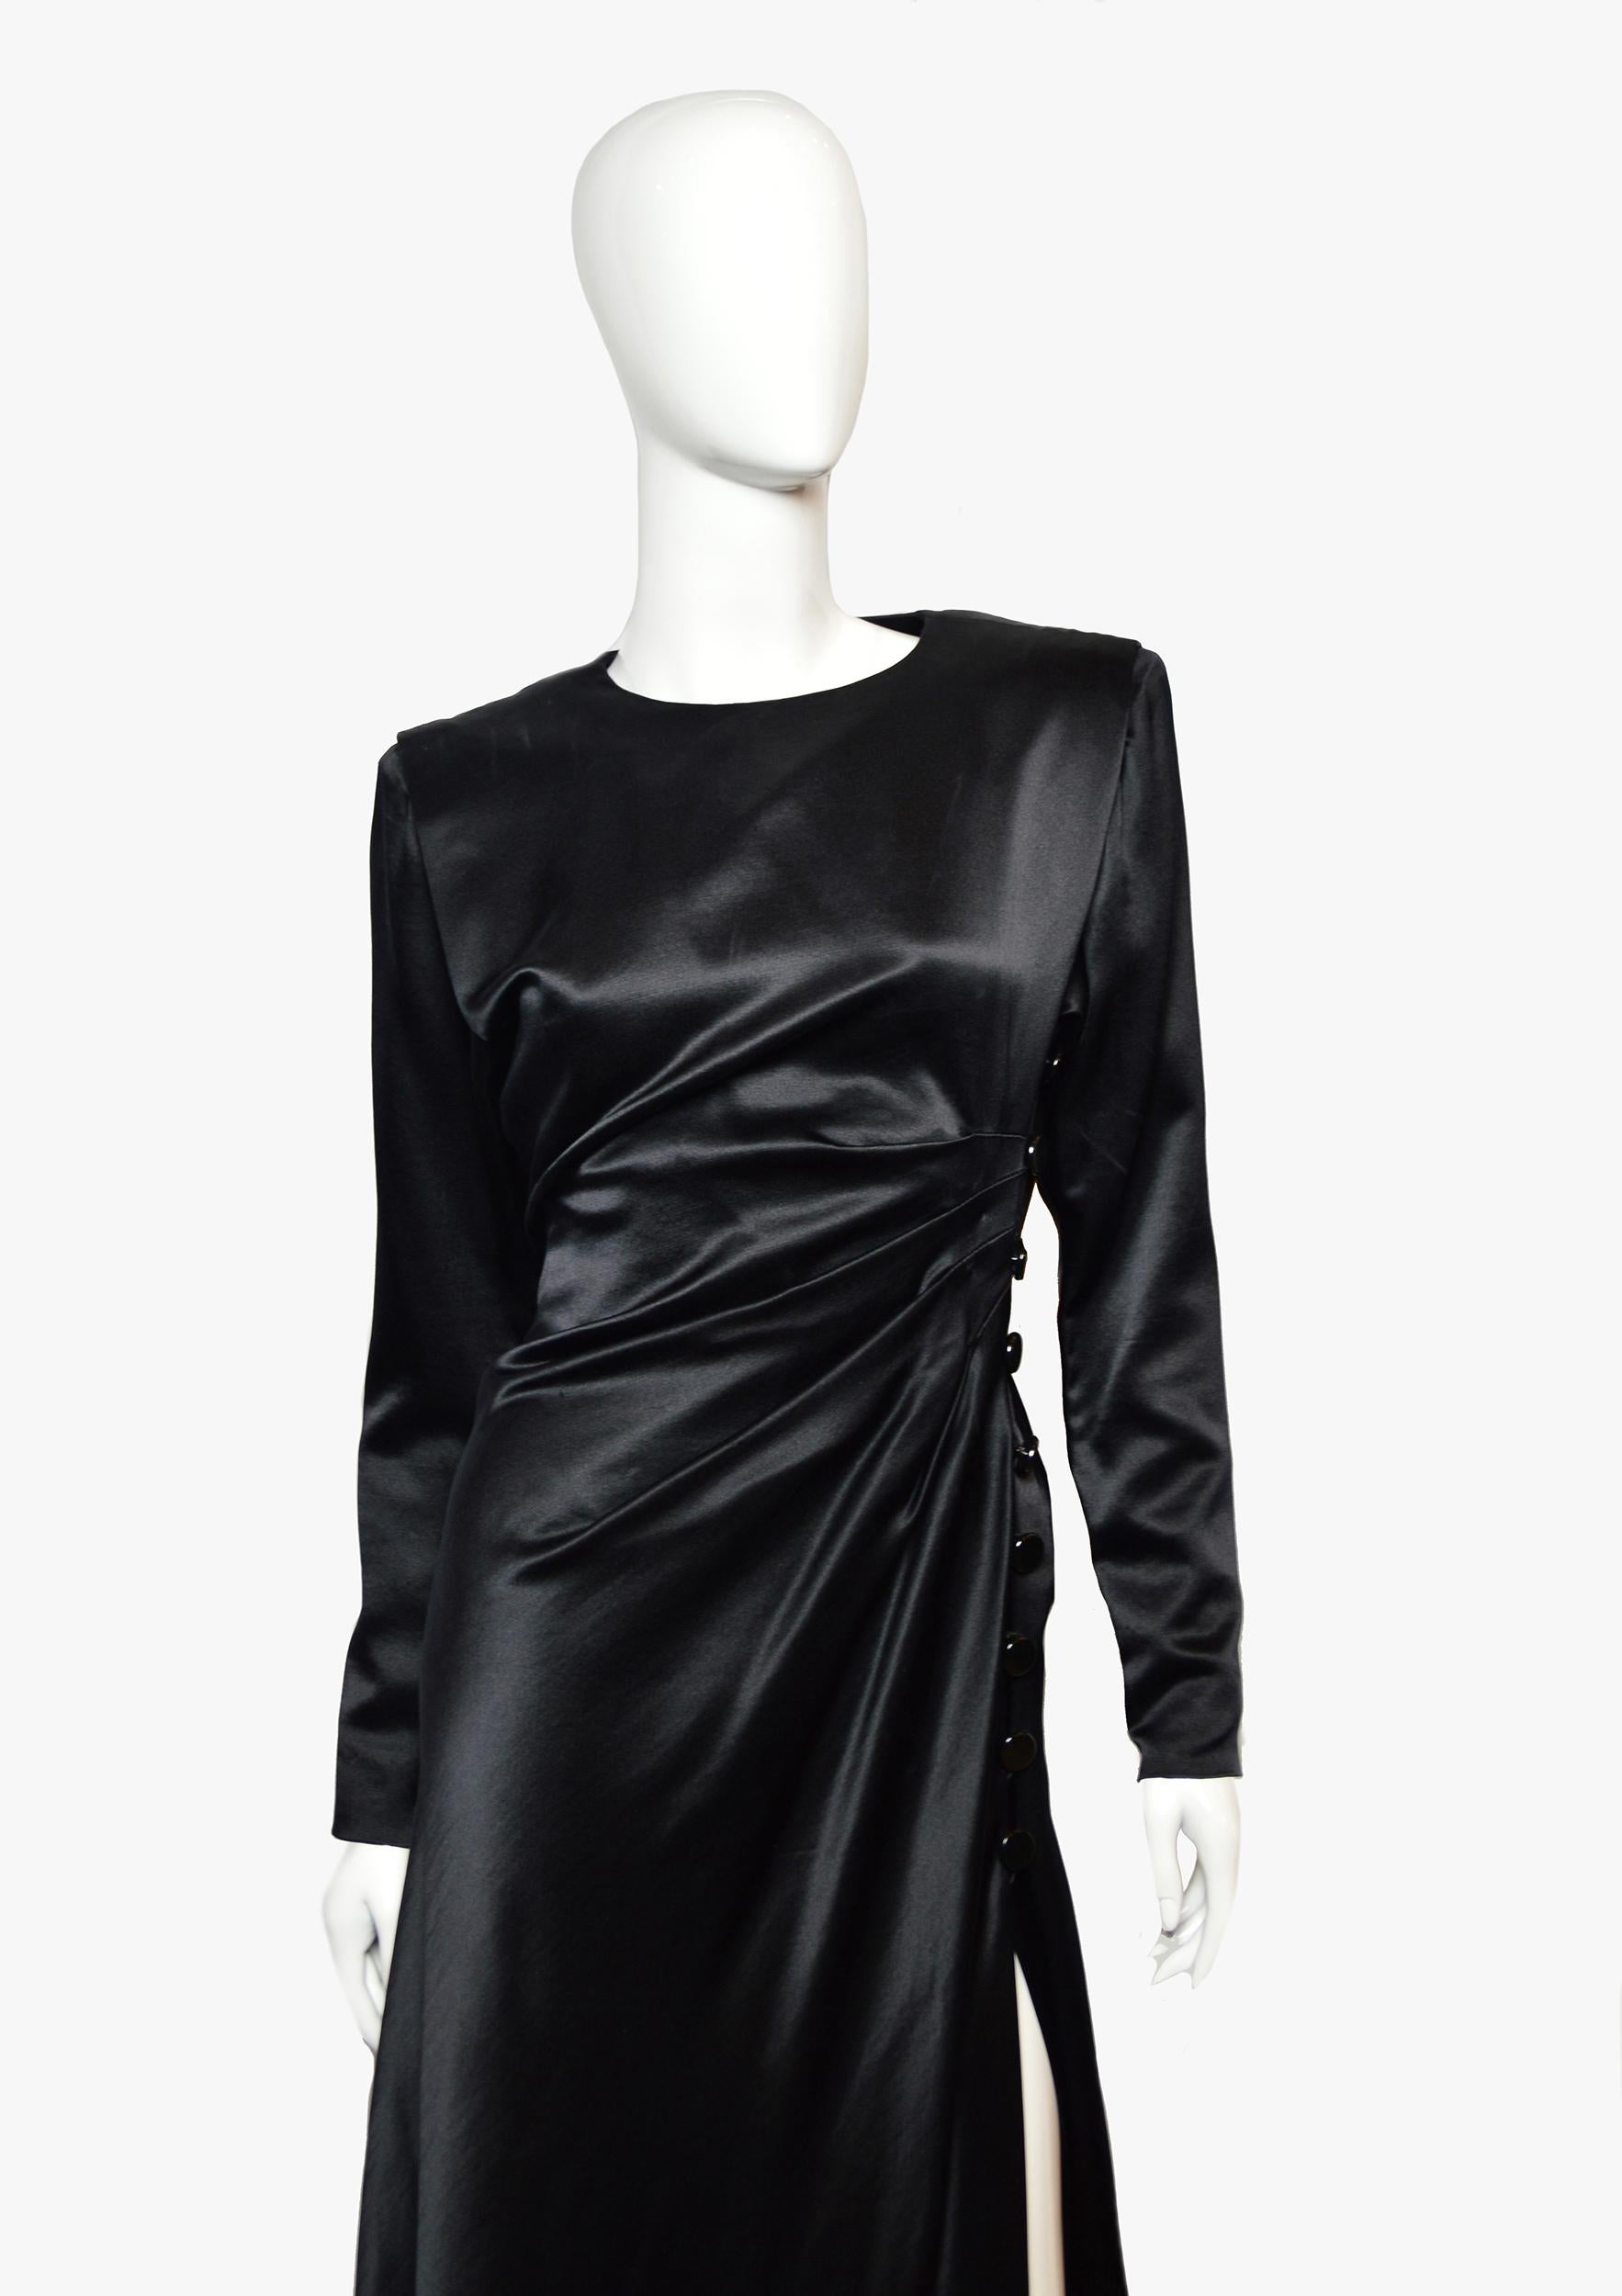 Yves Saint Laurent runway vintage black evening dress, Fall-winter 1987-1988 show.

A flowing dress of incredible beauty, accurately reflecting the style of the great couturier.

Shoulders with a clear line, draped with buttons in the chest area,